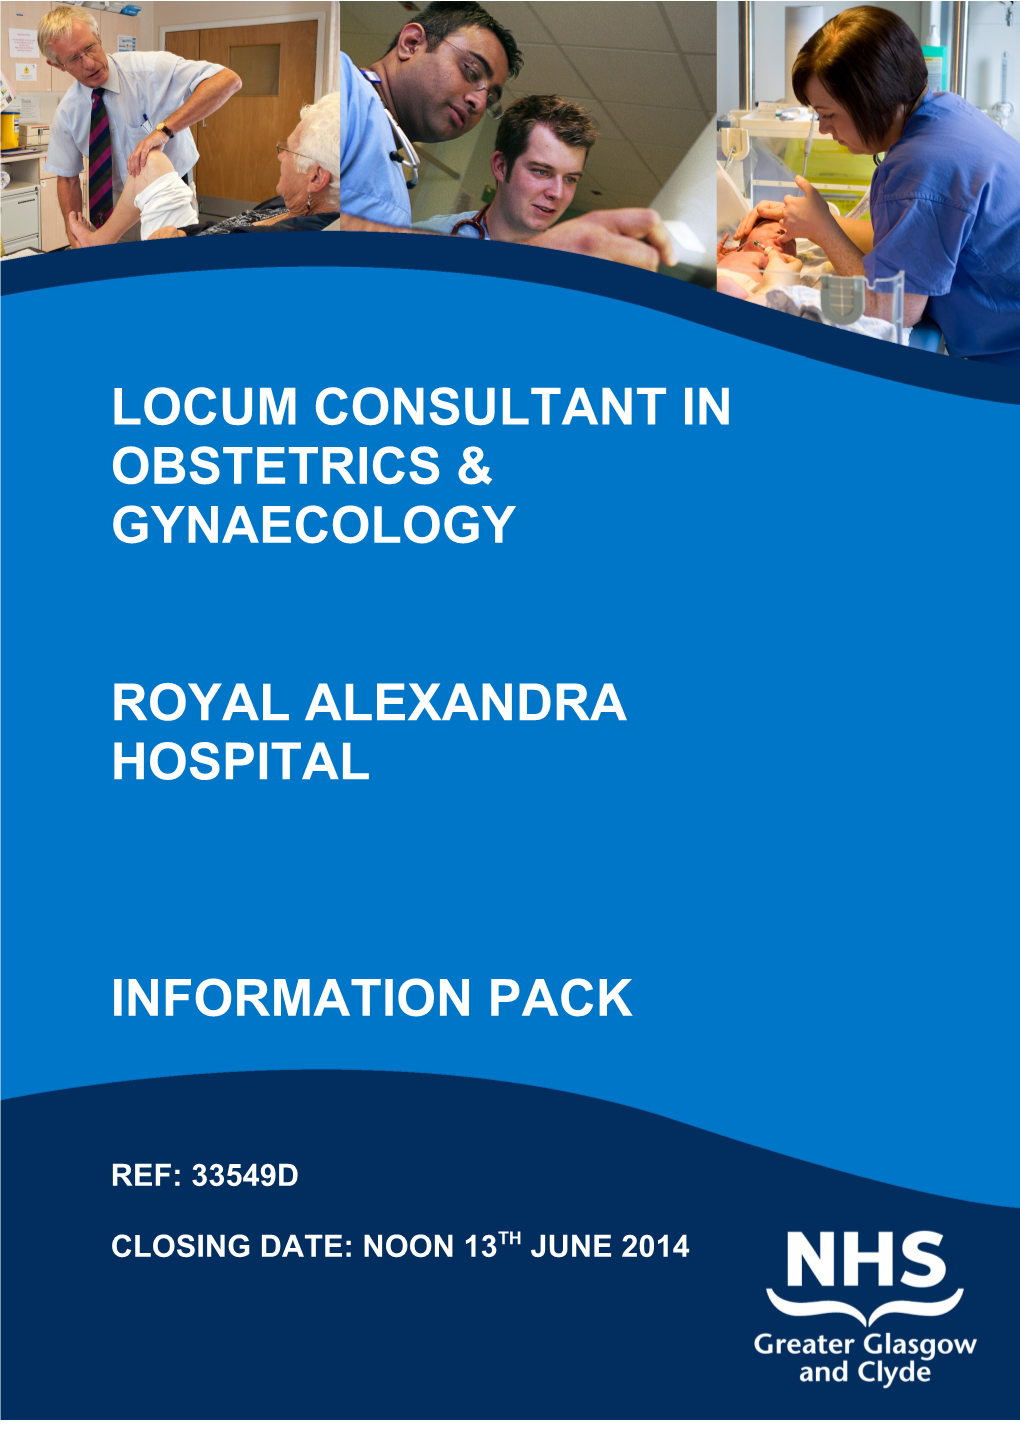 Locum Consultant in Obstetrics & Gynaecology